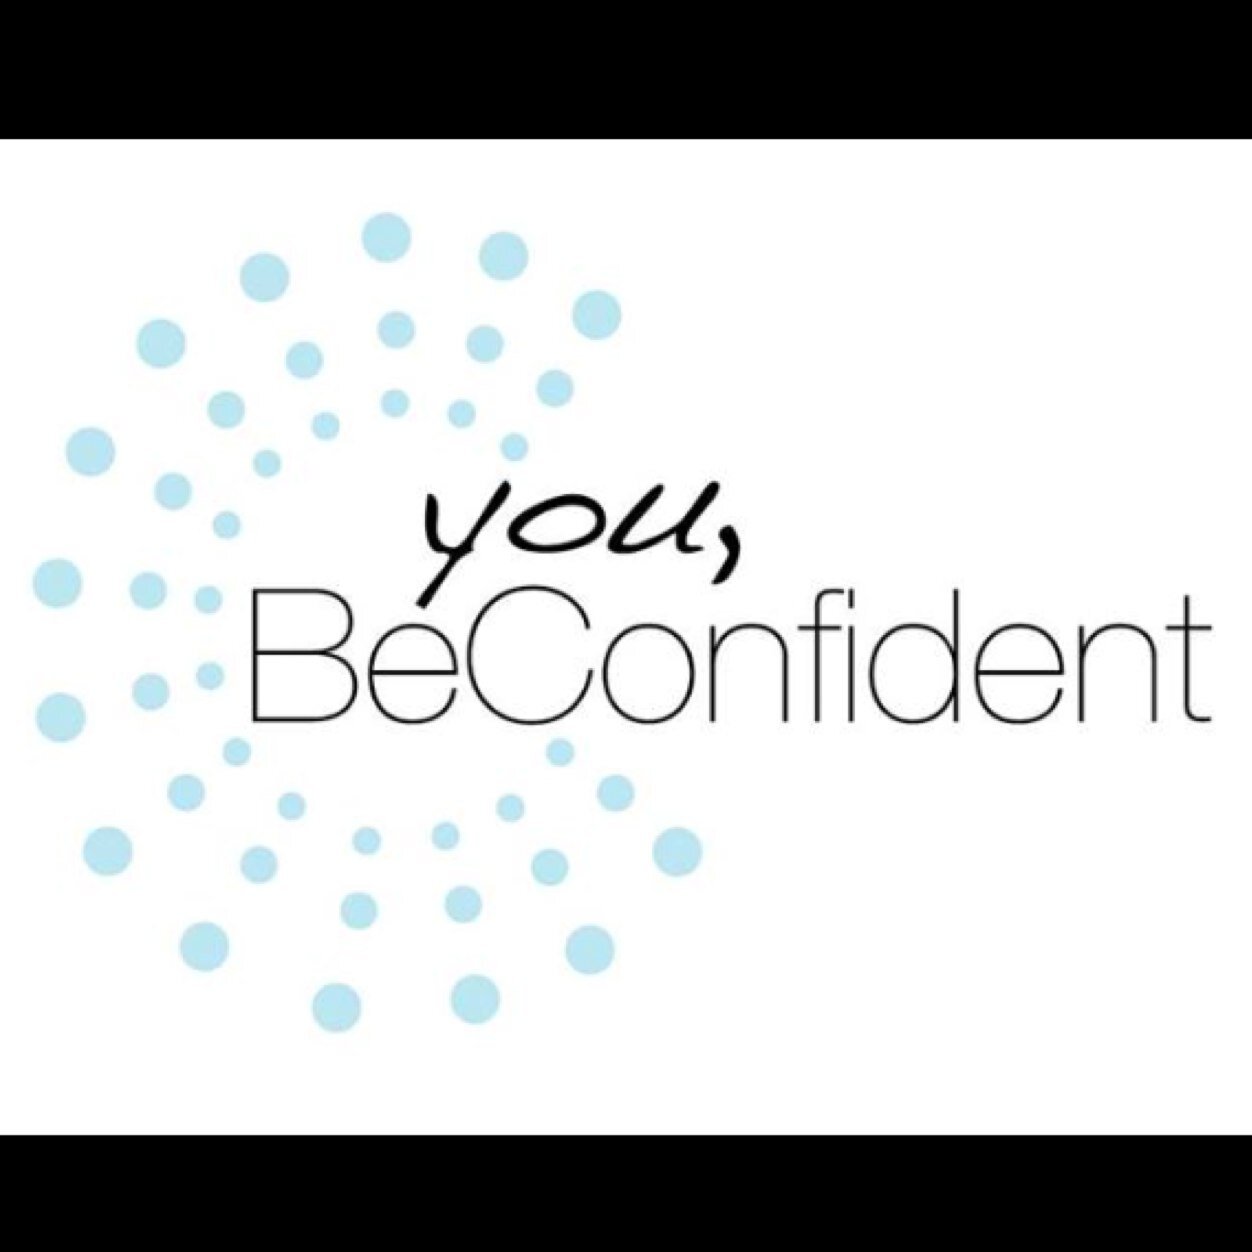 You, BeConfident is an upcoming subscription beauty box service.  We can't wait to get beauty products in your hands.  Meantime, let's get to know each other.